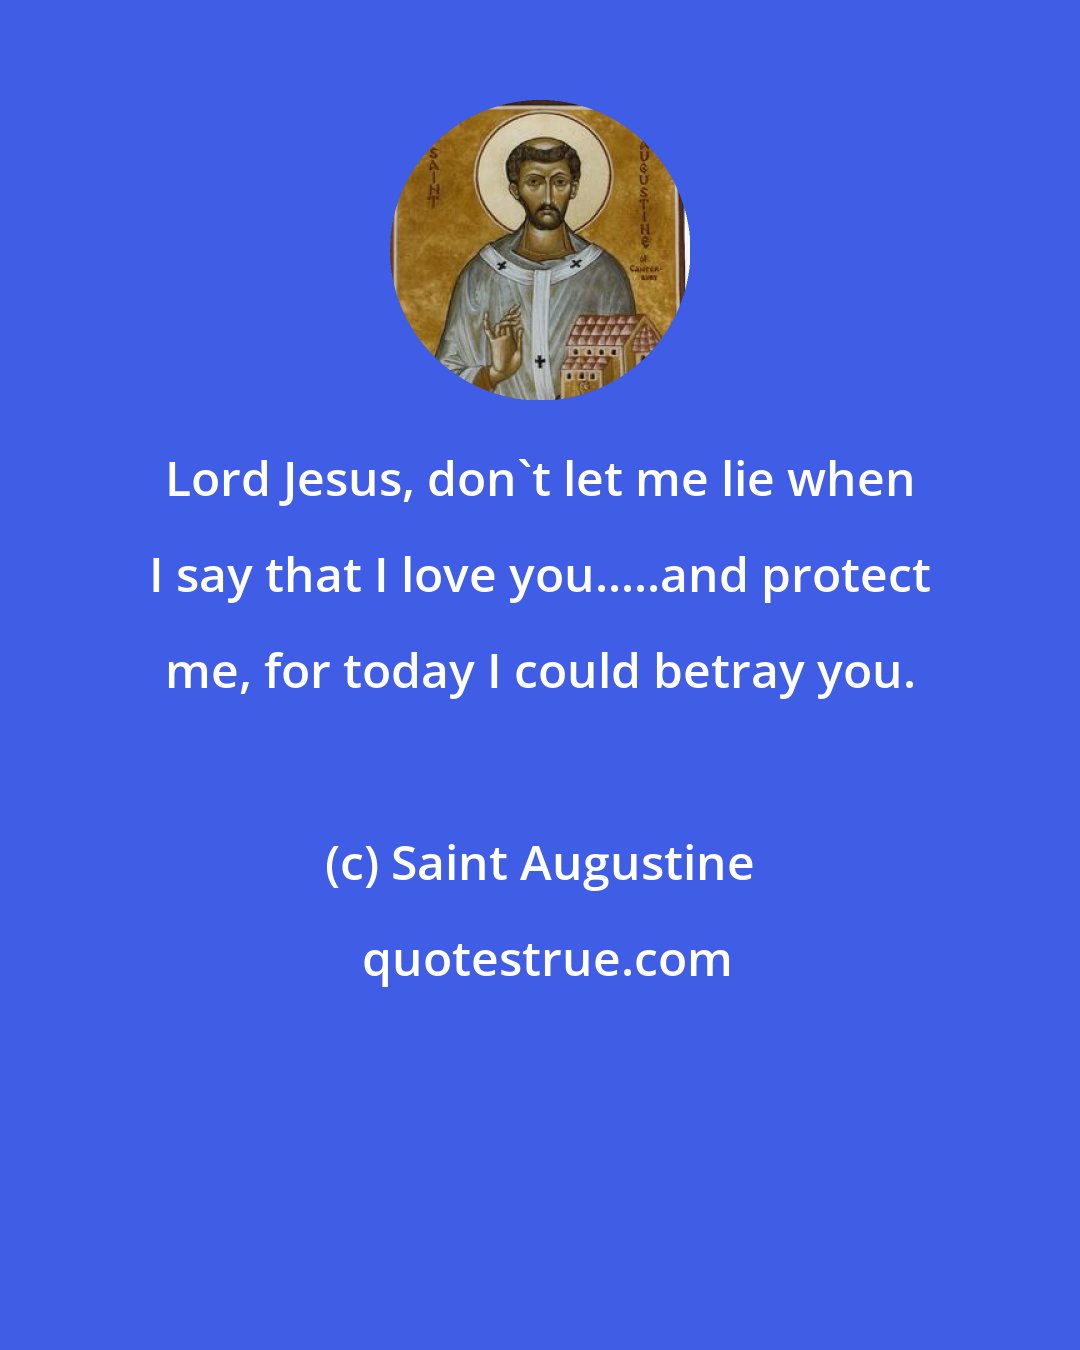 Saint Augustine: Lord Jesus, don't let me lie when I say that I love you.....and protect me, for today I could betray you.